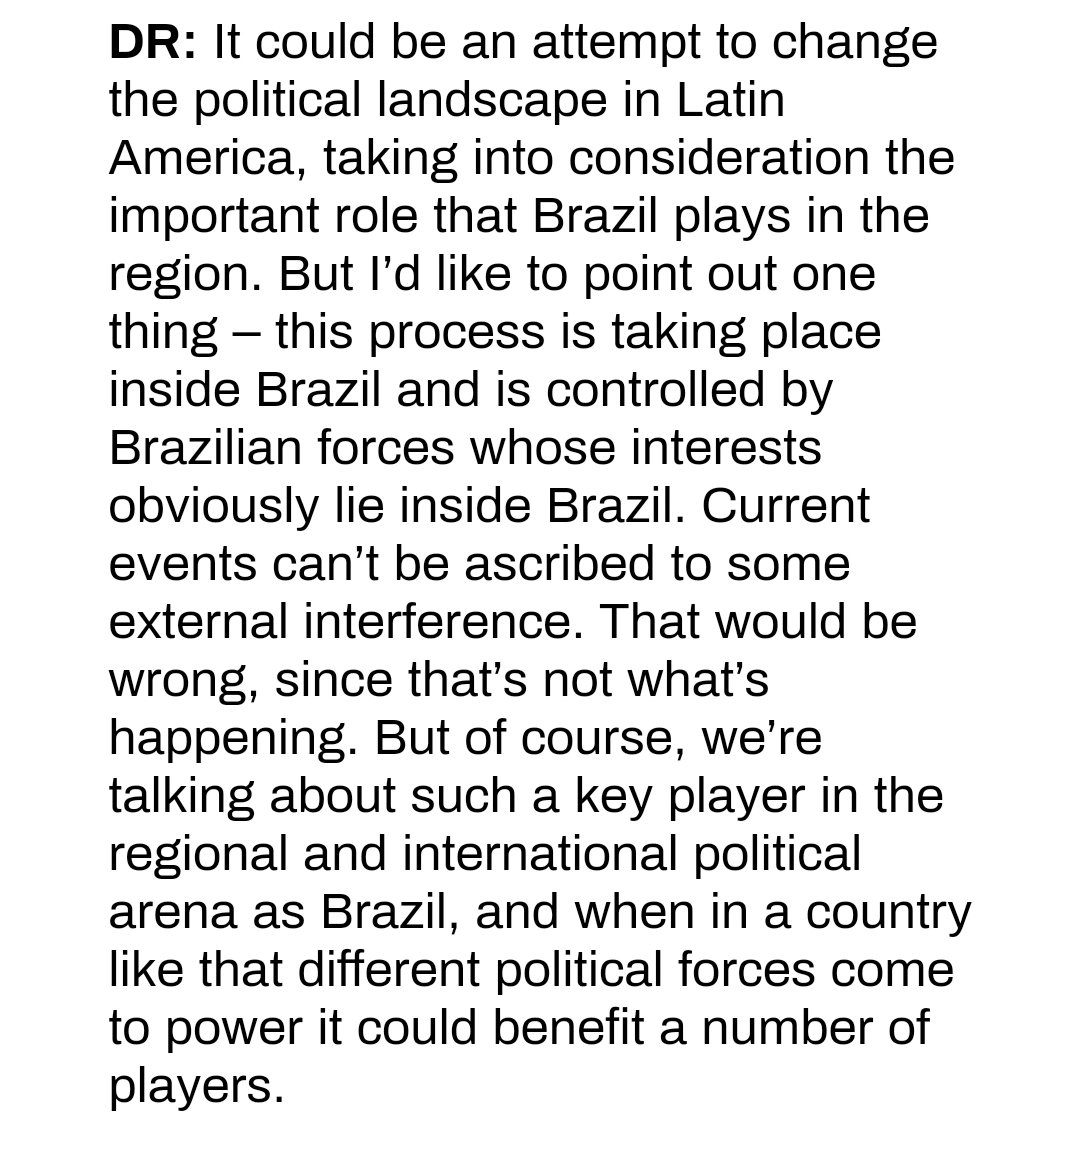 Breathtakingly, Dilma lied about US involvement while the coup was taking place and defended Michel Temer.She denies any external involvement 3 x in a row with RT in May 2016.  https://www.rt.com/news/343686-dilma-rousseff-rt-exclusive/She is cool as a cucumber while USA coups her. 